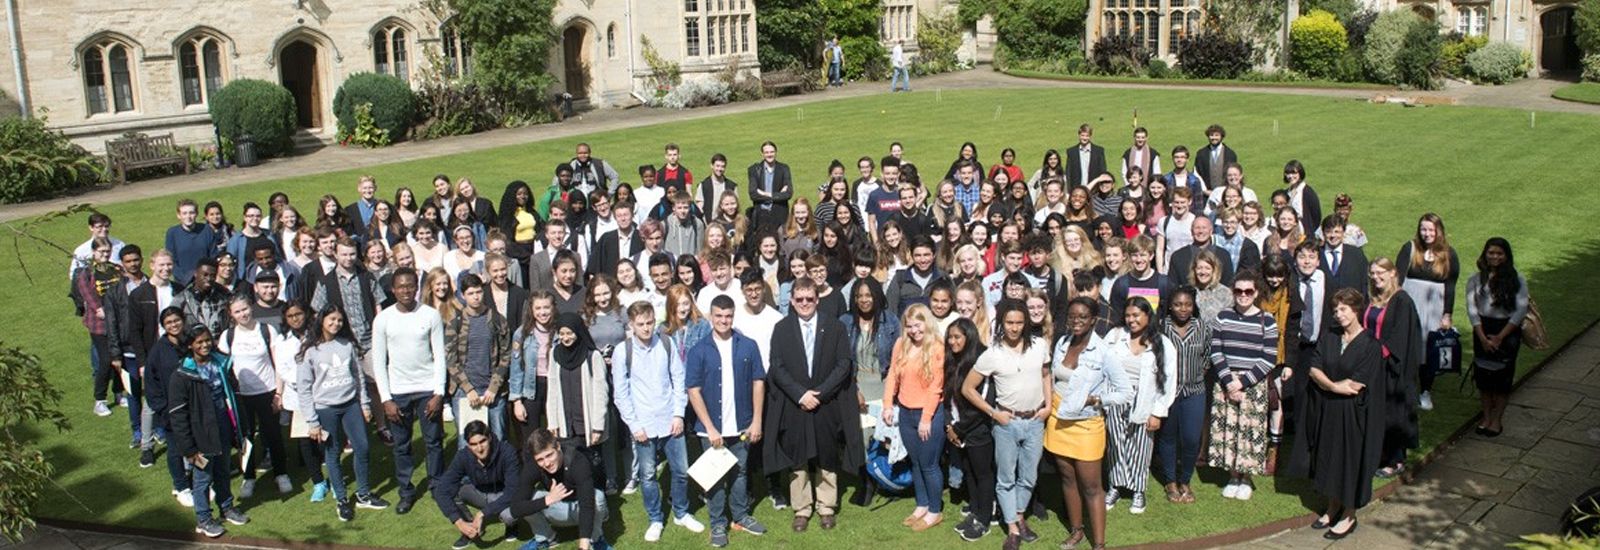 Students at Wadham College